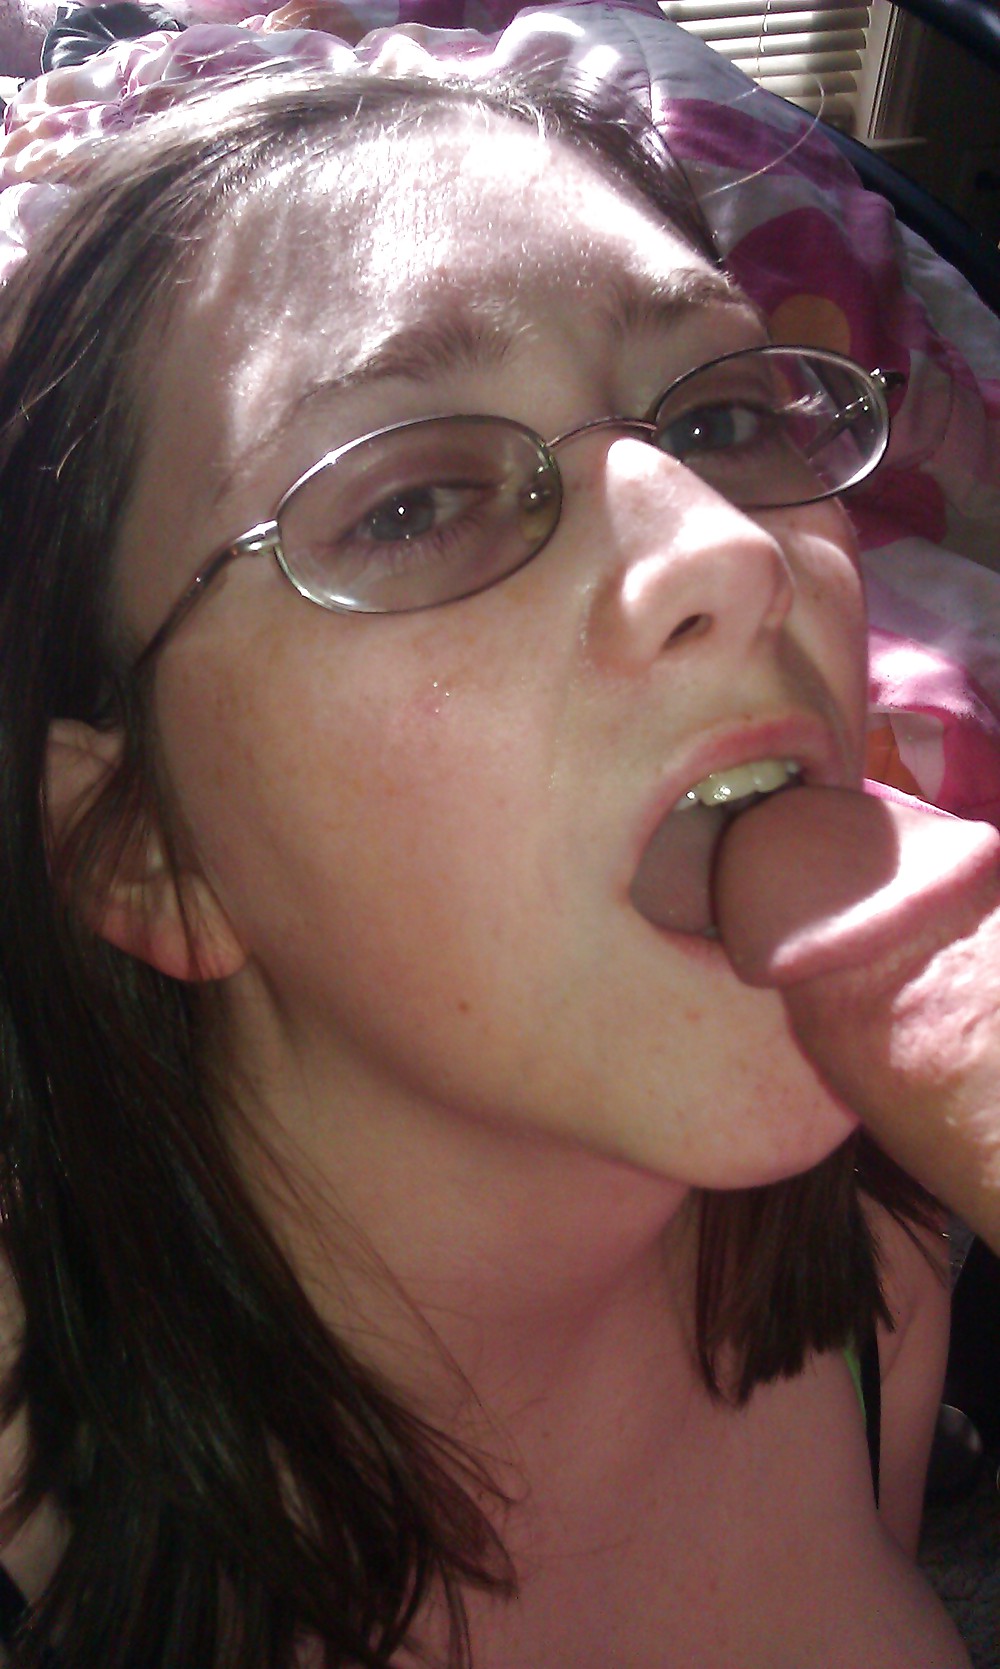 My girlfriend, ashlee. Cute with glasses, and big tits! #8303791